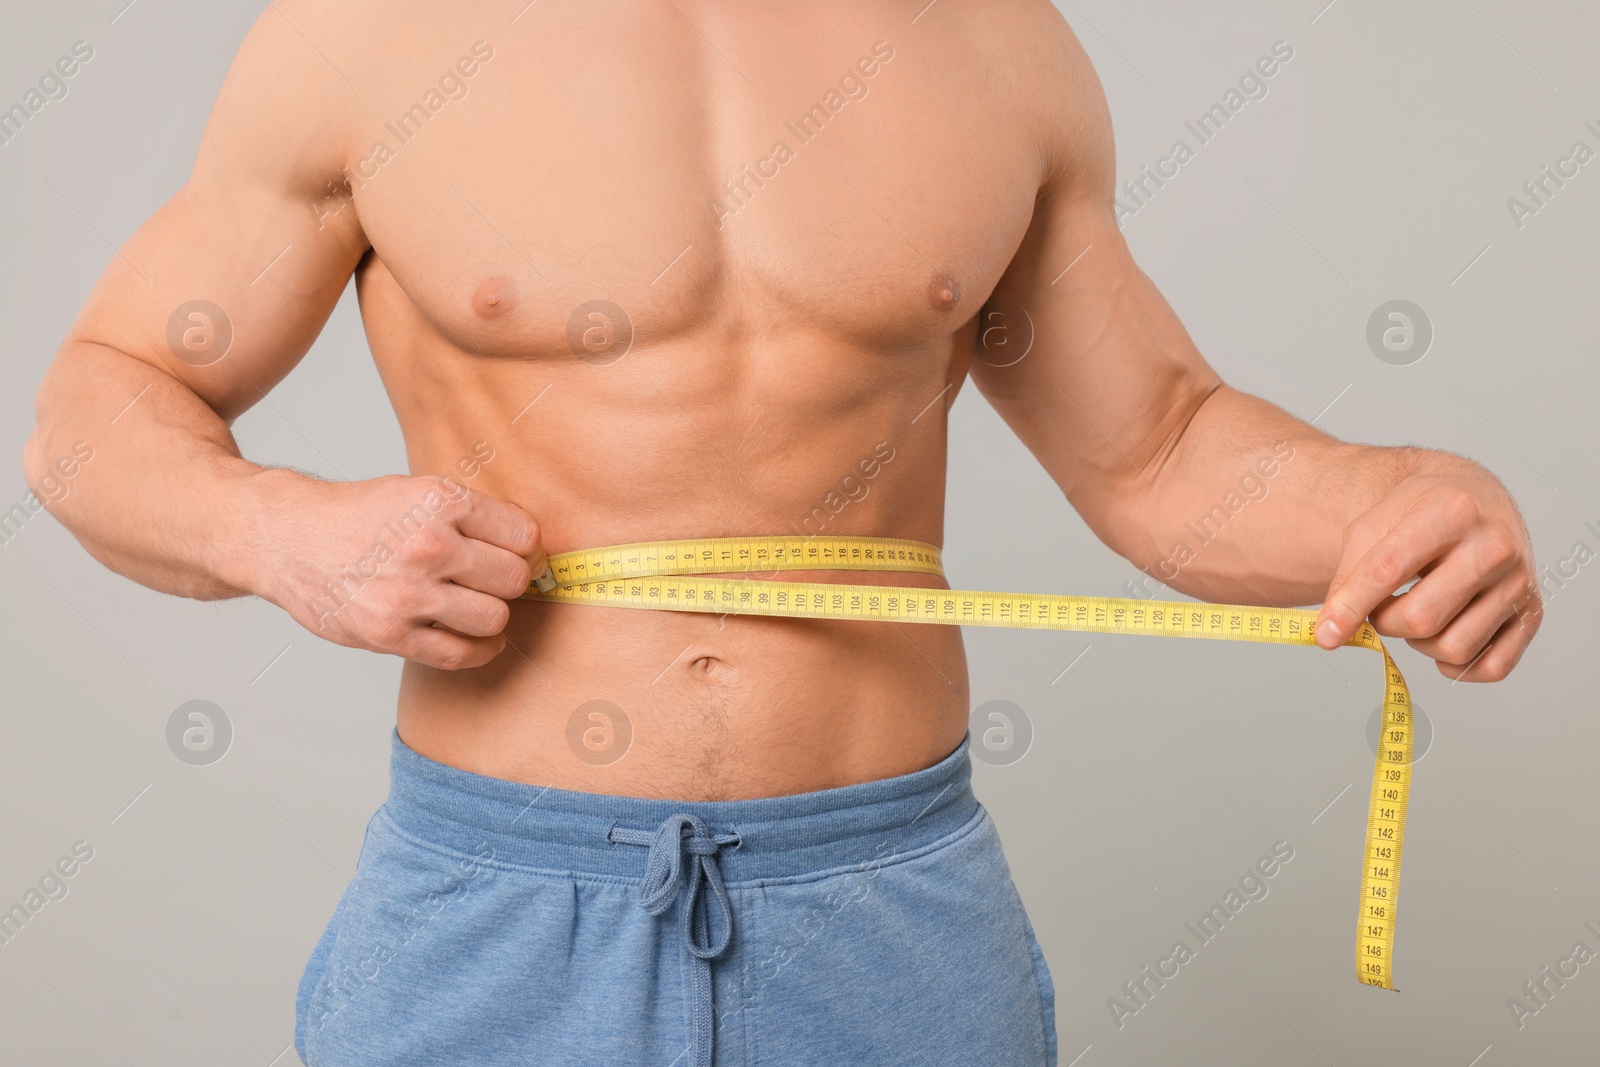 Photo of Athletic man measuring waist with tape on light grey background, closeup. Weight loss concept